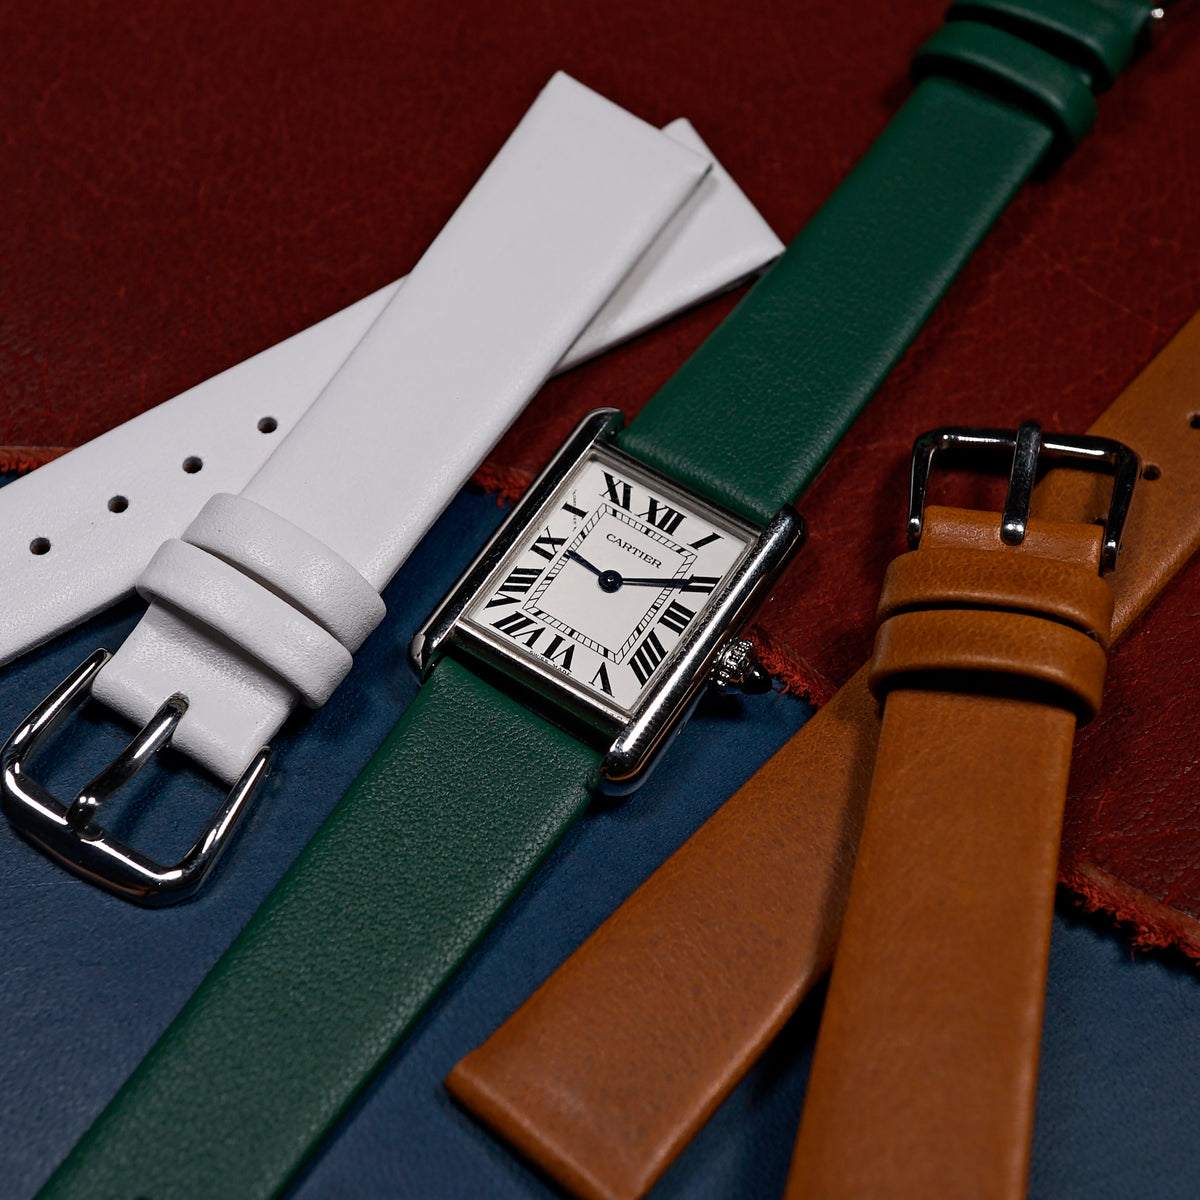 Unstitched Smooth Leather Watch Strap in Green